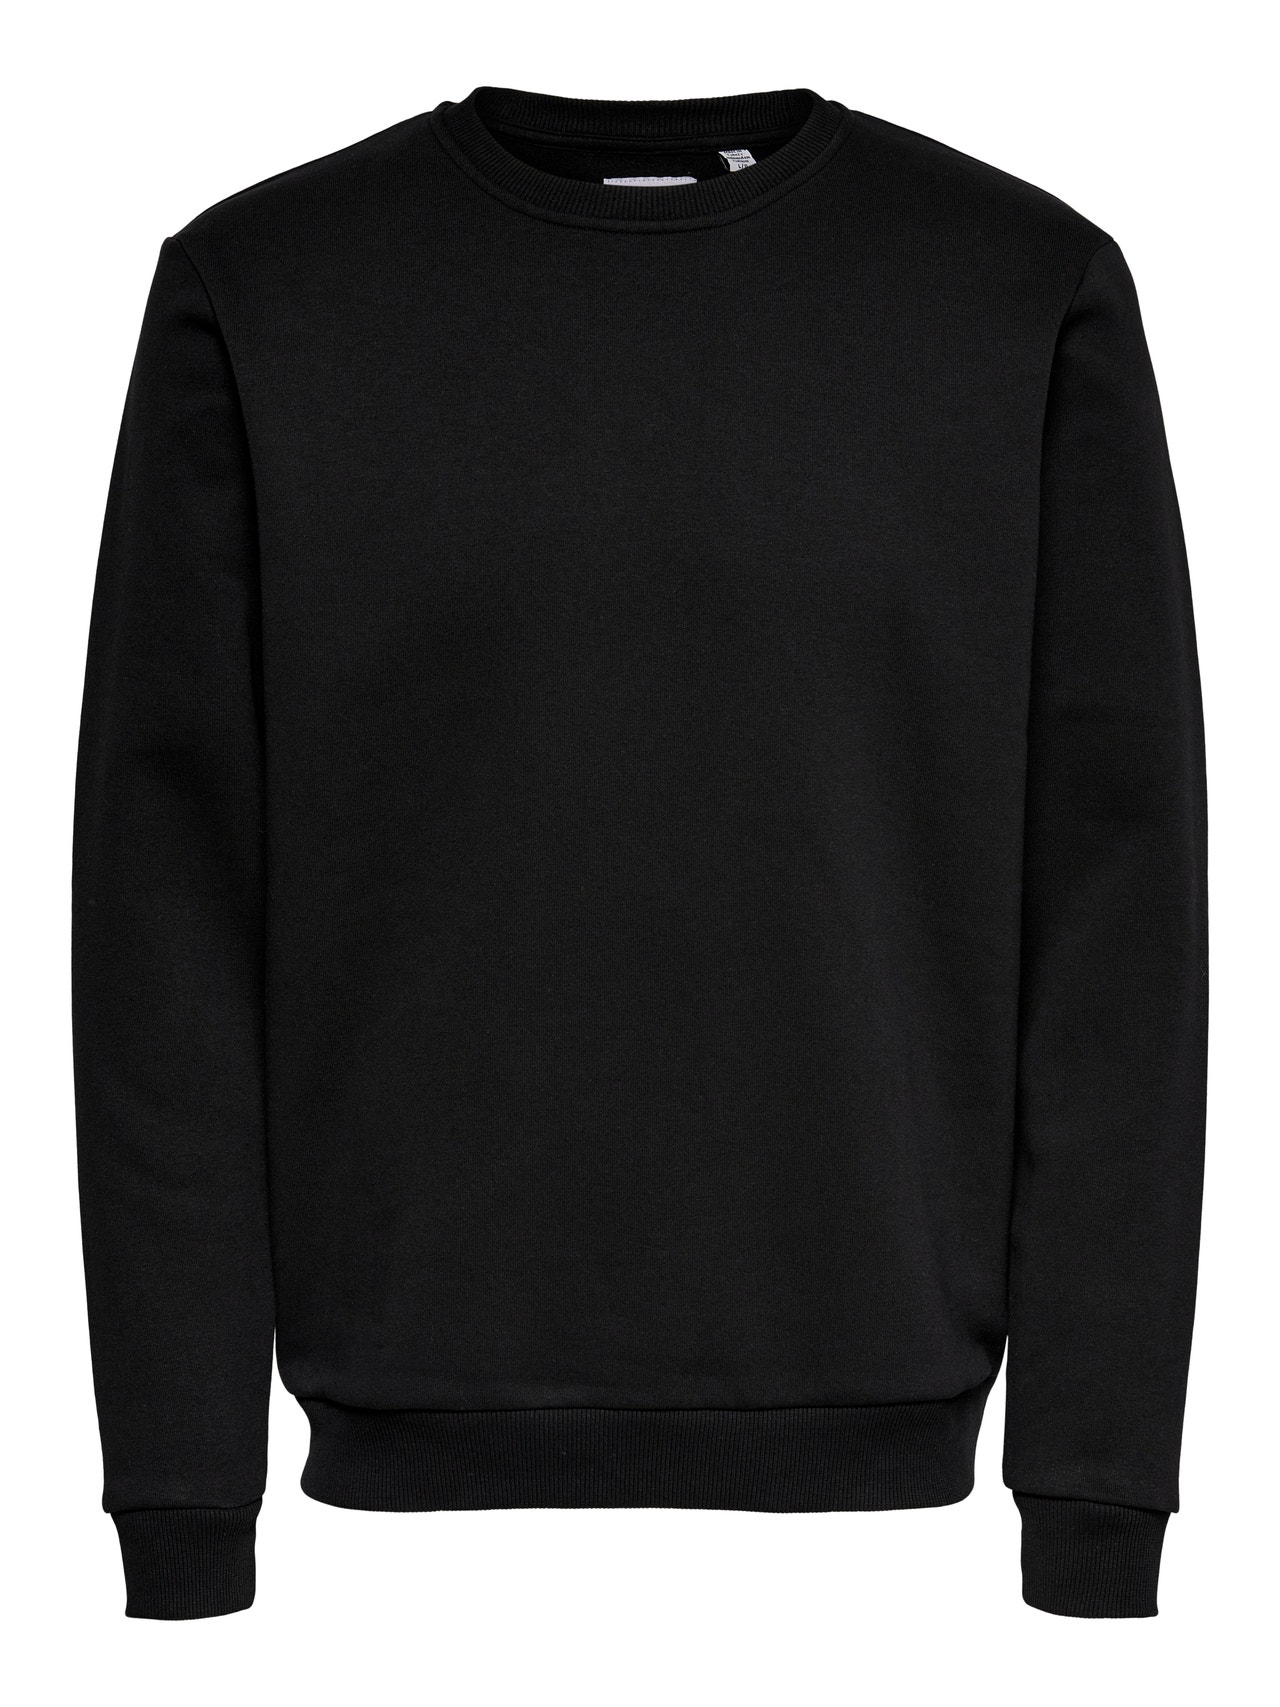 ONLY & SONS Normal passform O-ringning Sweatshirt -Black - 22018683